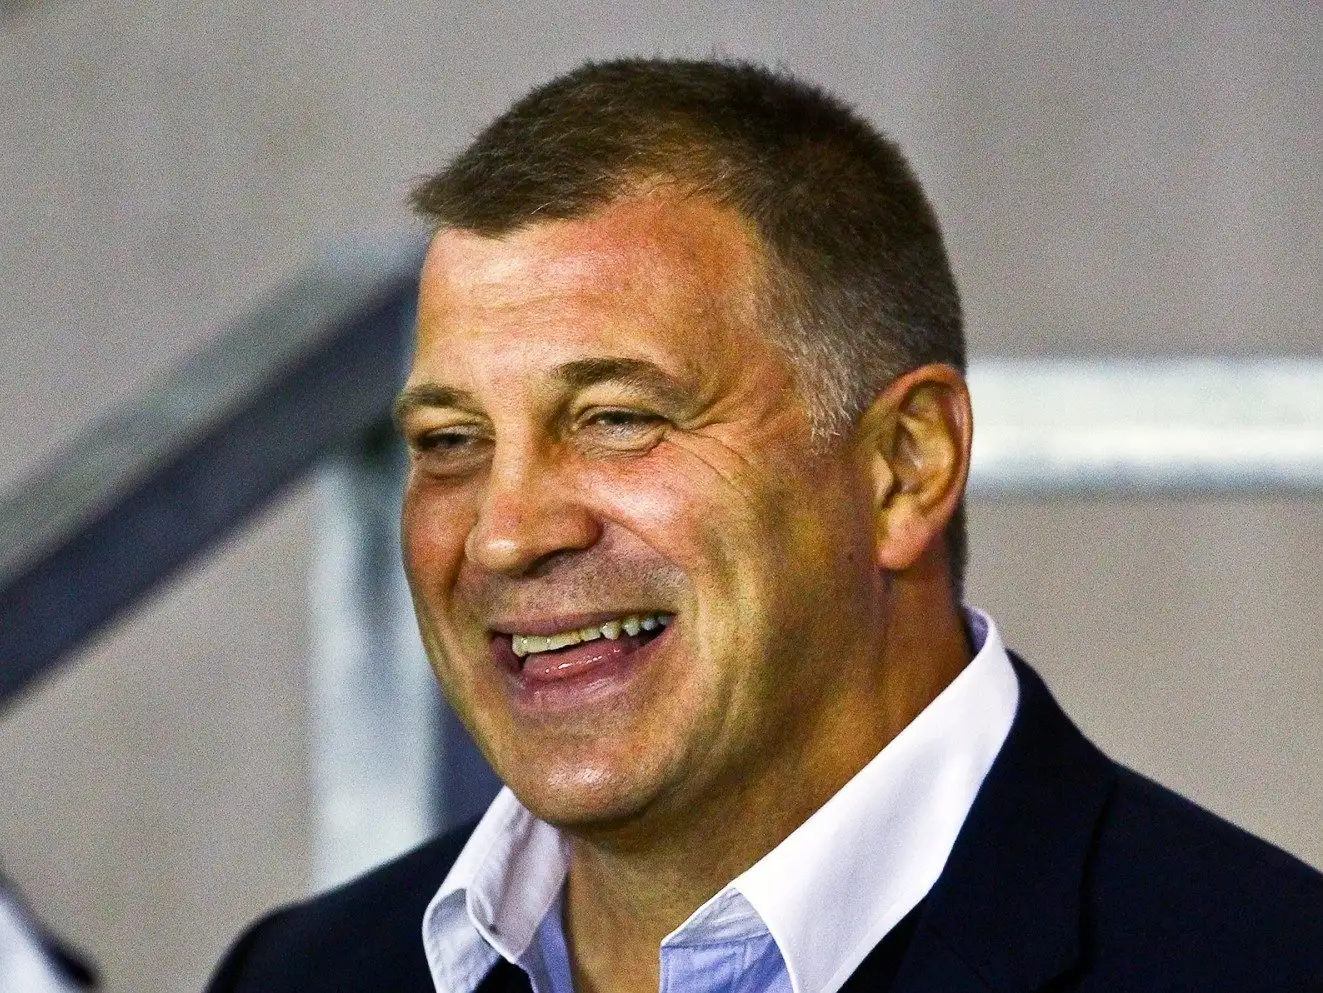 Wane: Two points all that matter